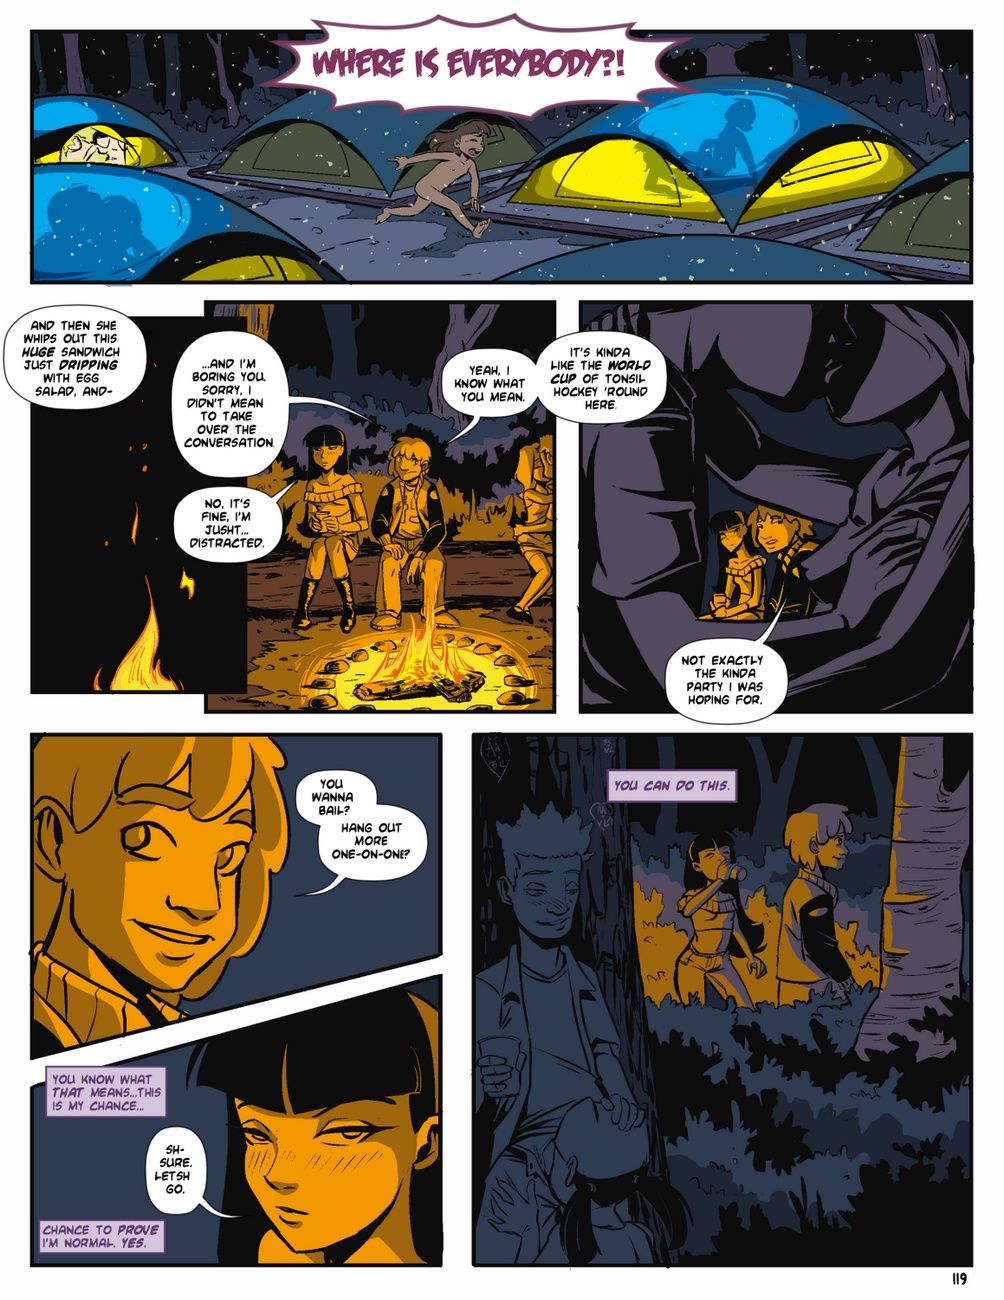 Camp Sherwood [Mr.D] (Ongoing) page 120